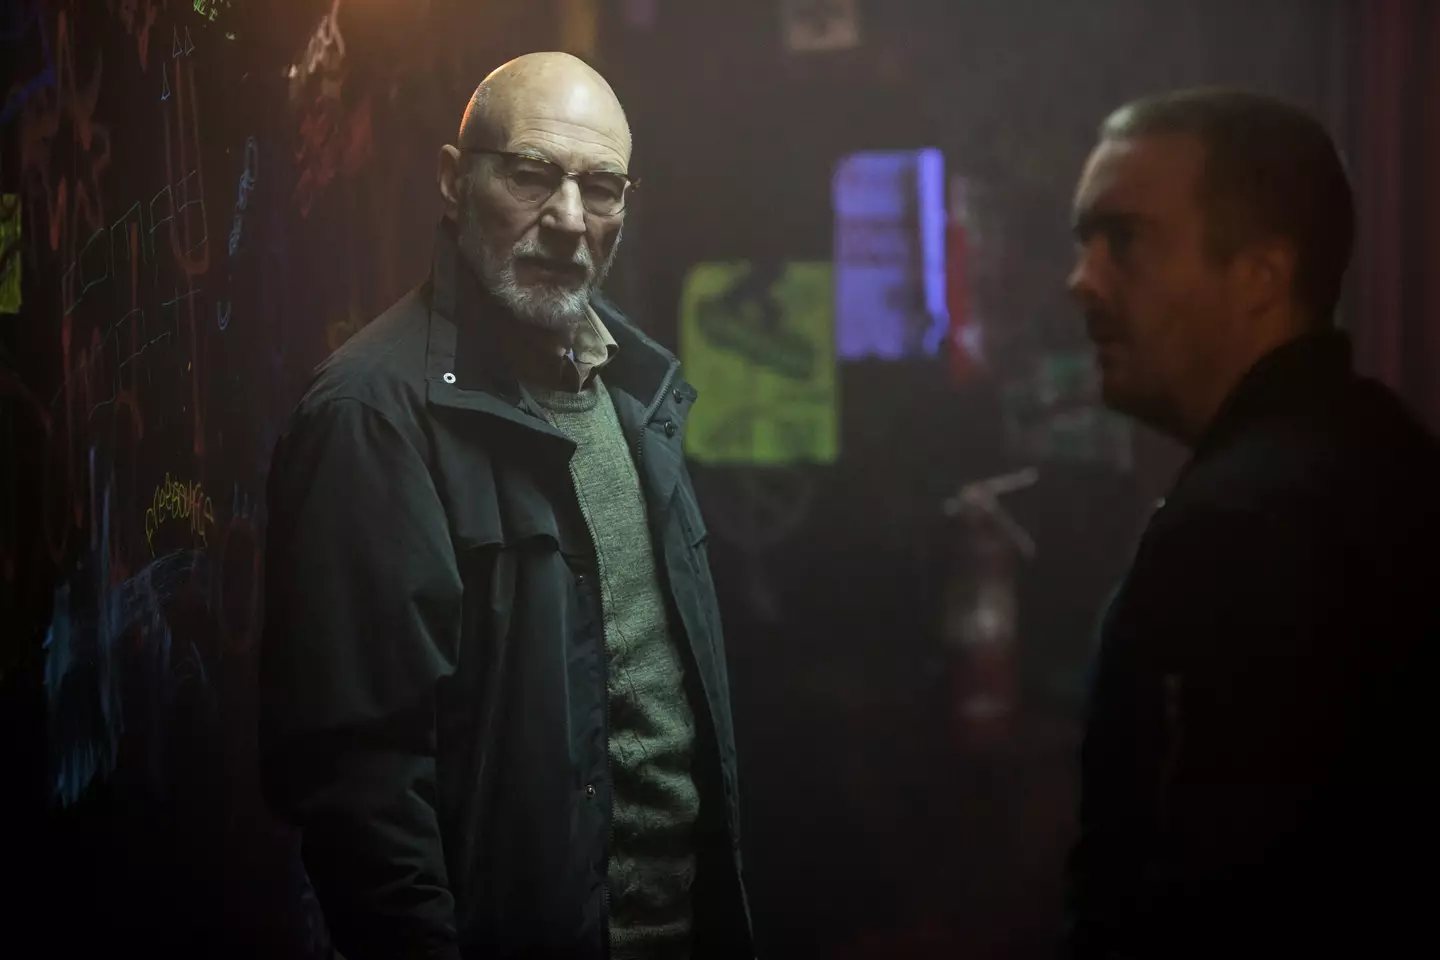 Patrick Stewart plays a neo-Nazi in Green Room.